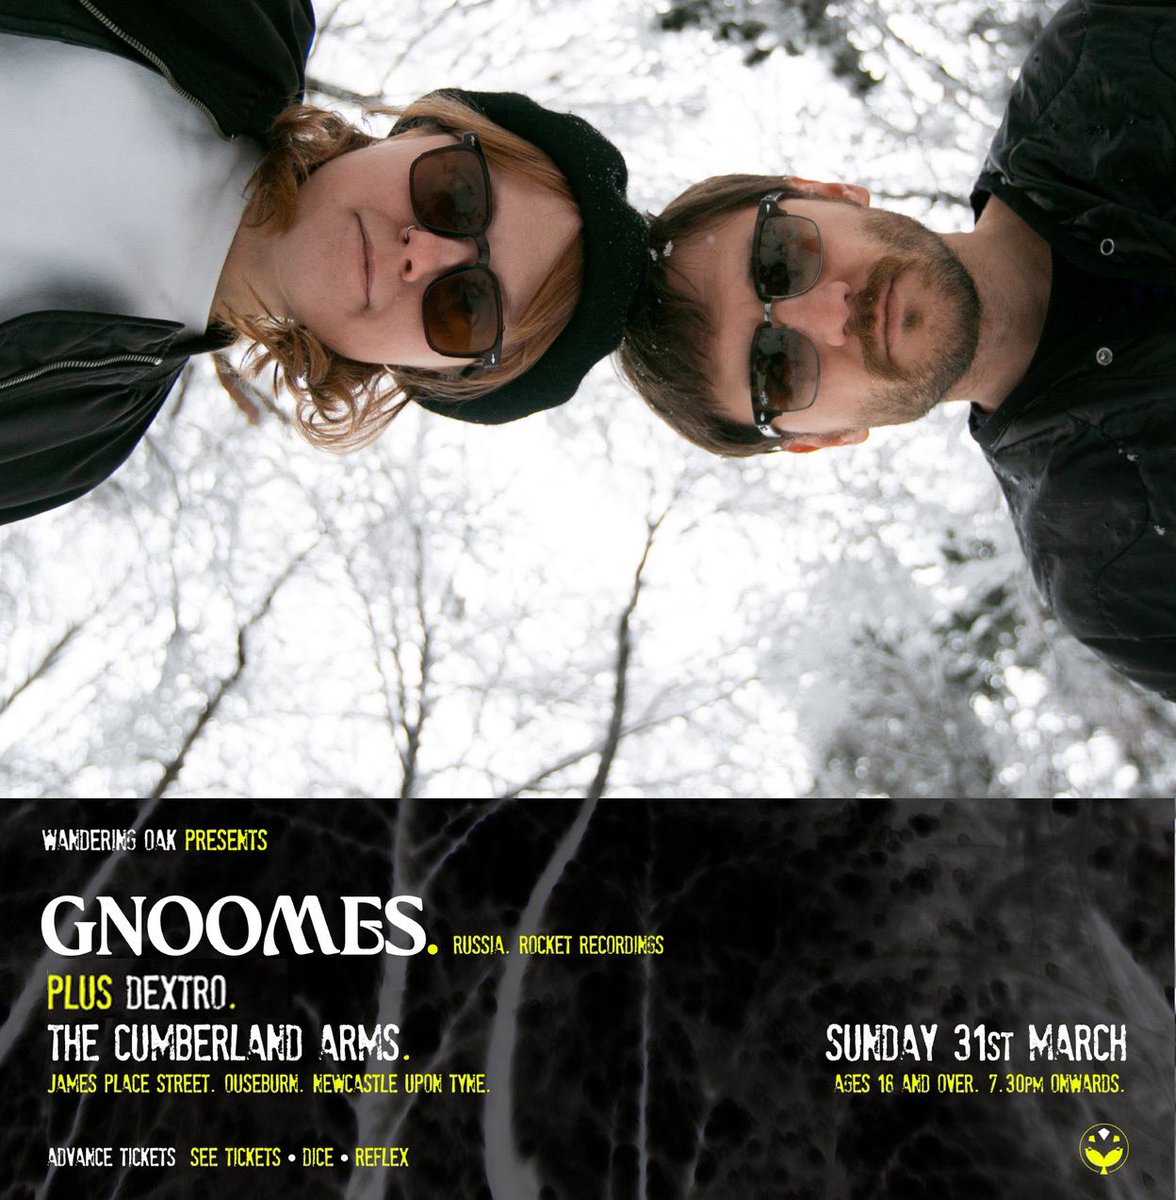 Live show! Looking forward to supporting the excellent @gnoomesofficial (@RocketRecording) at the Cumberland Arms, Newcastle, on Sunday 31st March. Thanks to @WanderingOakUK for curating this 🙏🏼. Come join us - tix at the link in bio.